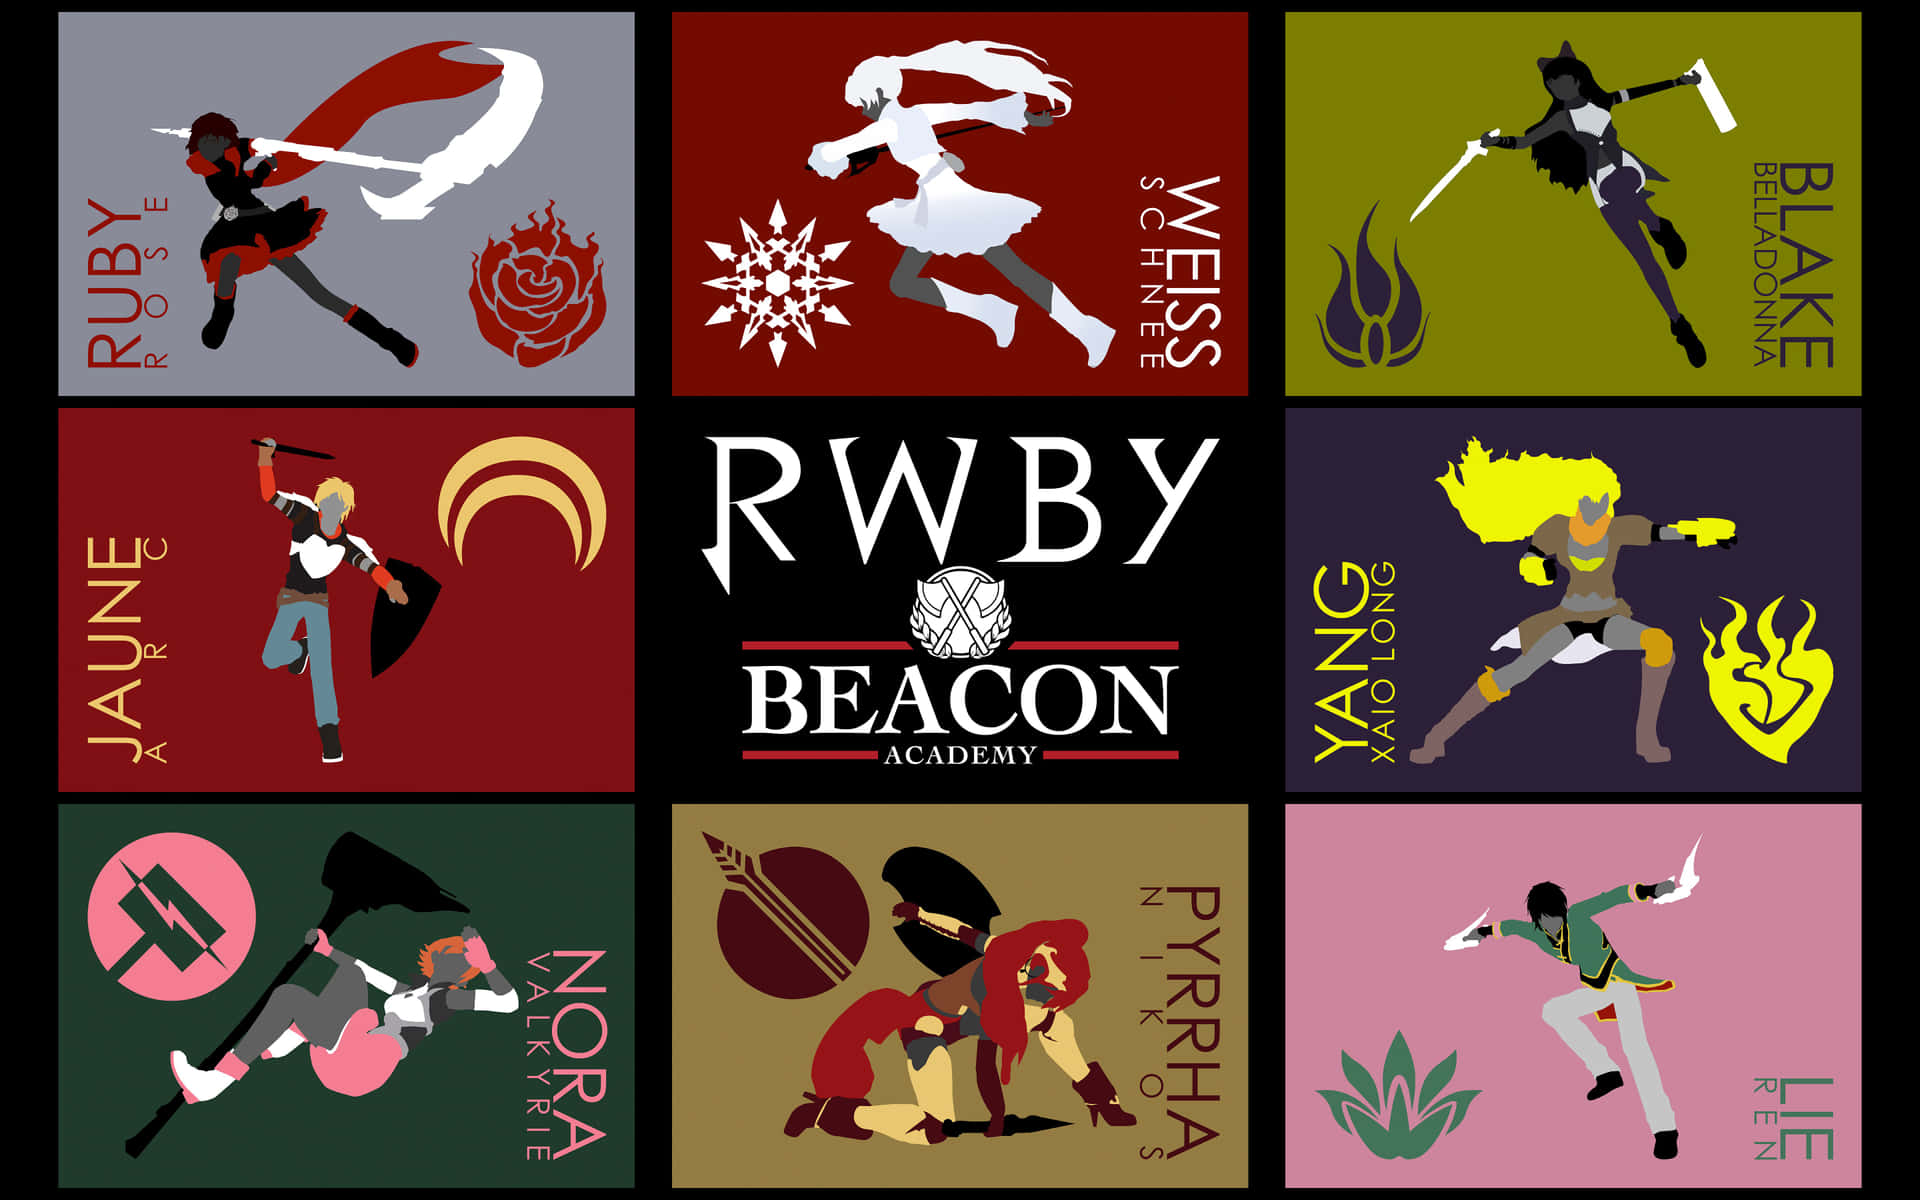 Team RWBY Upholding Justice and Lead the Way